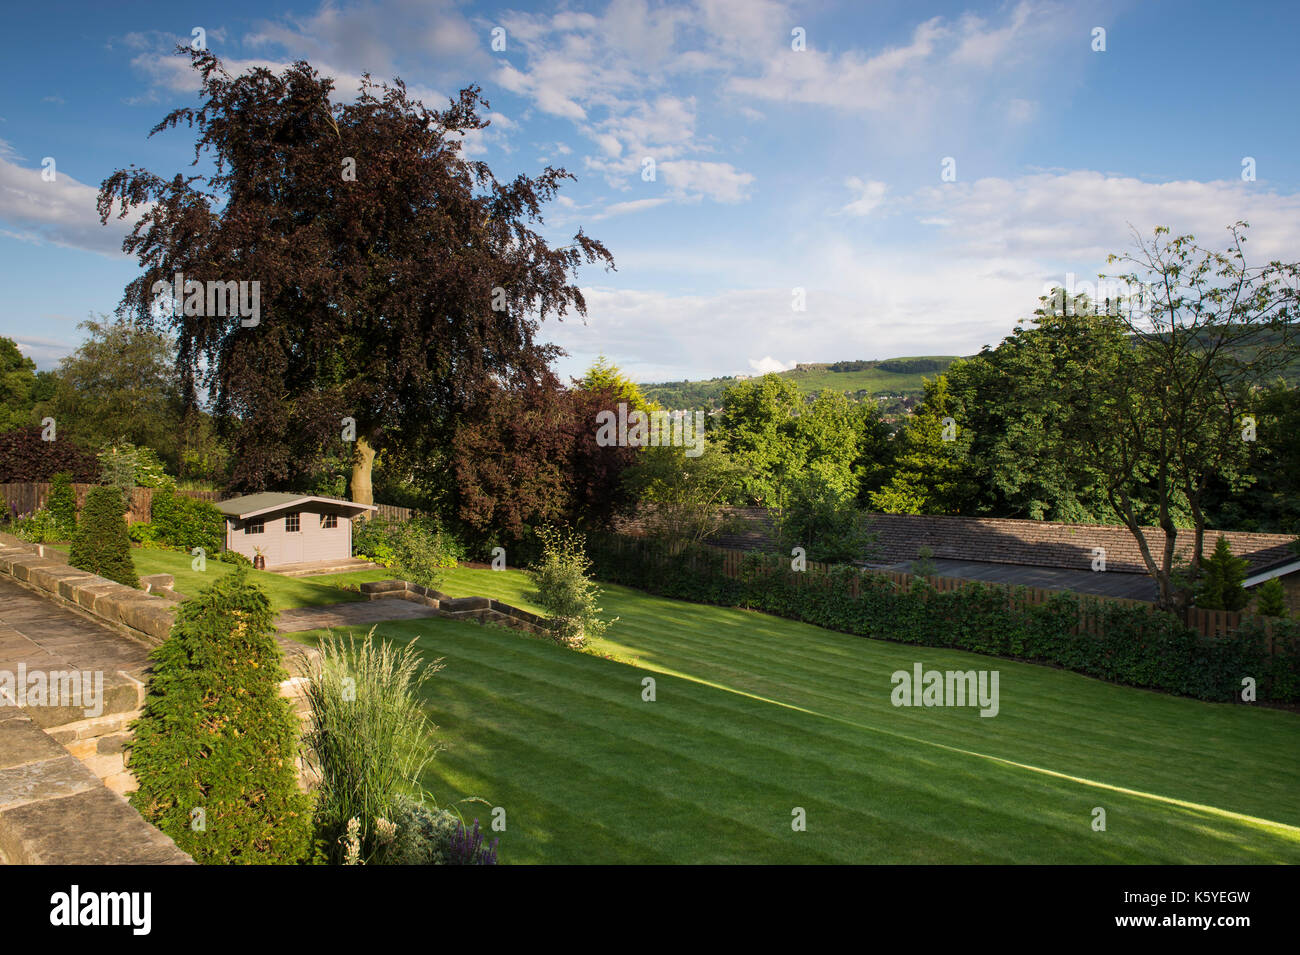 Beautiful, private, traditional, landscaped, country garden, West Yorkshire, England, UK - view over terraced lawns, trees & shed to hillside beyond. Stock Photo